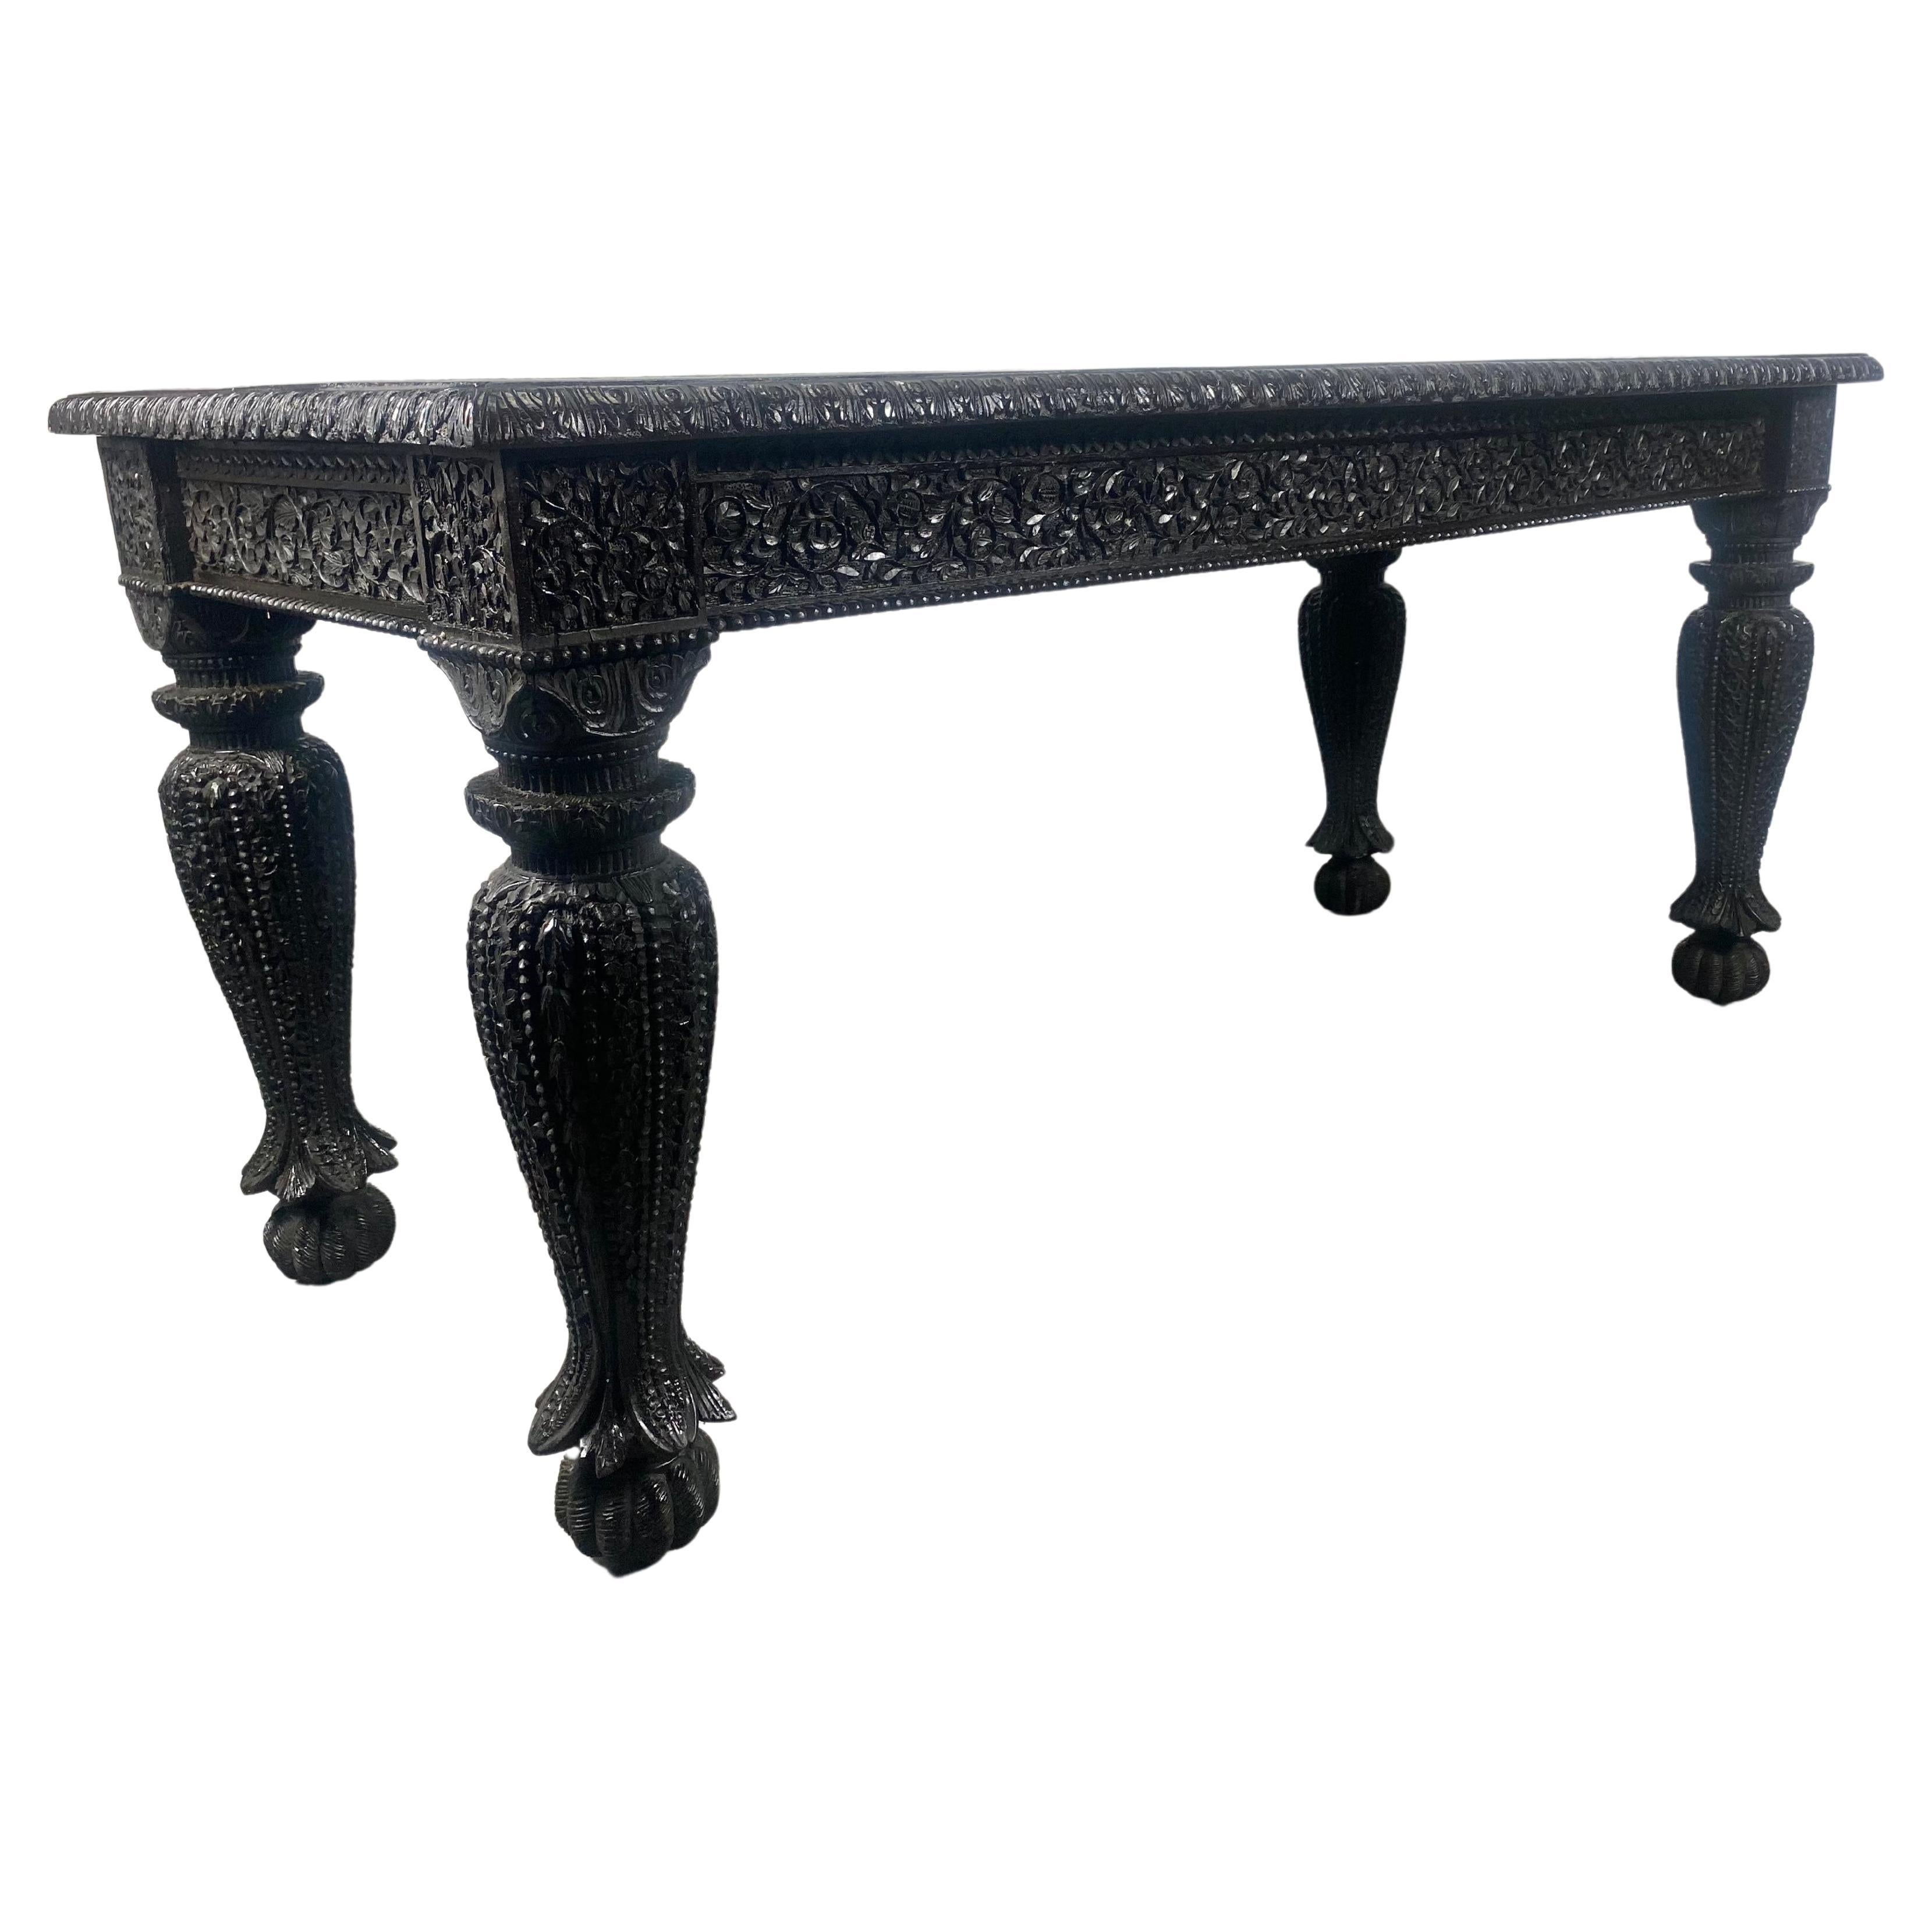 Exquisetly Carved Turn or the Century AngloIndian Table, Dining / Desk / Library